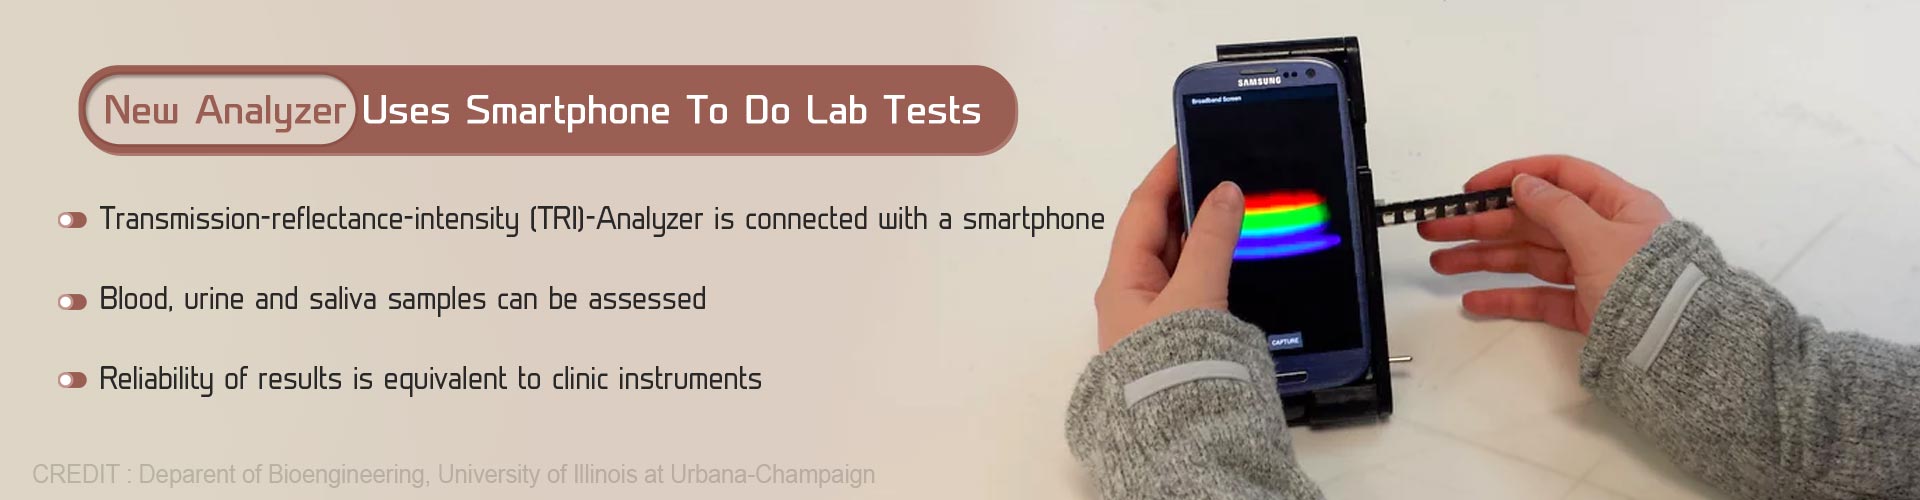 new analyzer uses smartphone to do lab tests
- transmission-reflectance-intensity (TRI) analyzer is connected with a smartphone
- blood, urine and saliva samples can be assessed
- reliability of results is equivalent to clinic instruments